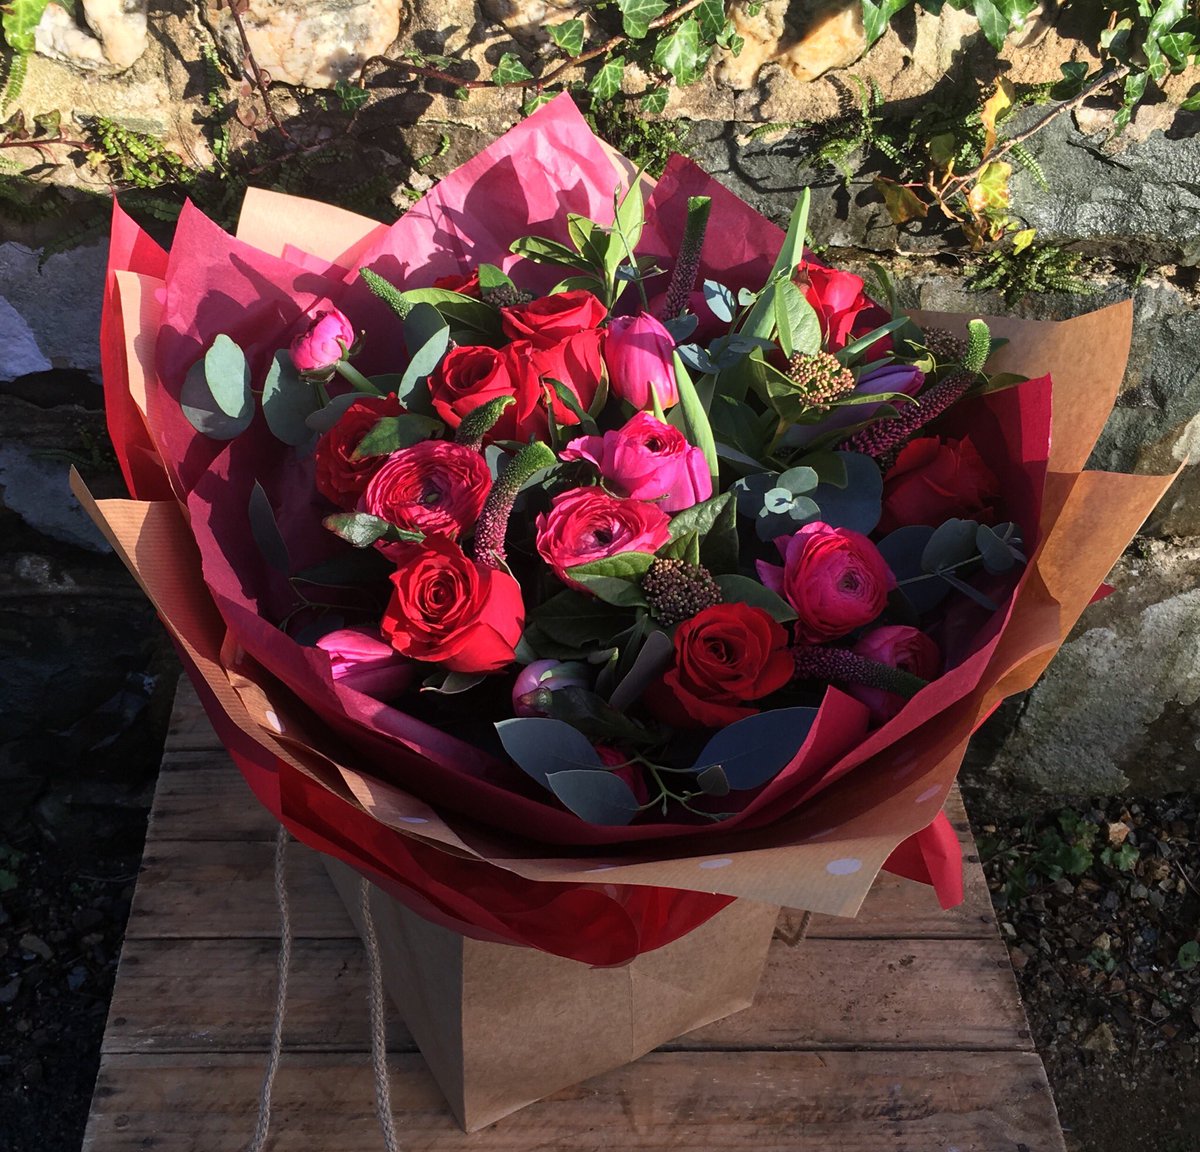 ❤️❤️ Valentines Day ❤️❤️
#vday #NewportPembs #ValentinesDay2018 #redflowers all foliage is British and also using some British flowers! Red roses from an ethnically sourced farm!! #NoPlastic #kraftpaper #Pembrokeshire #northpembs @newportpembs #supportlocal #florist